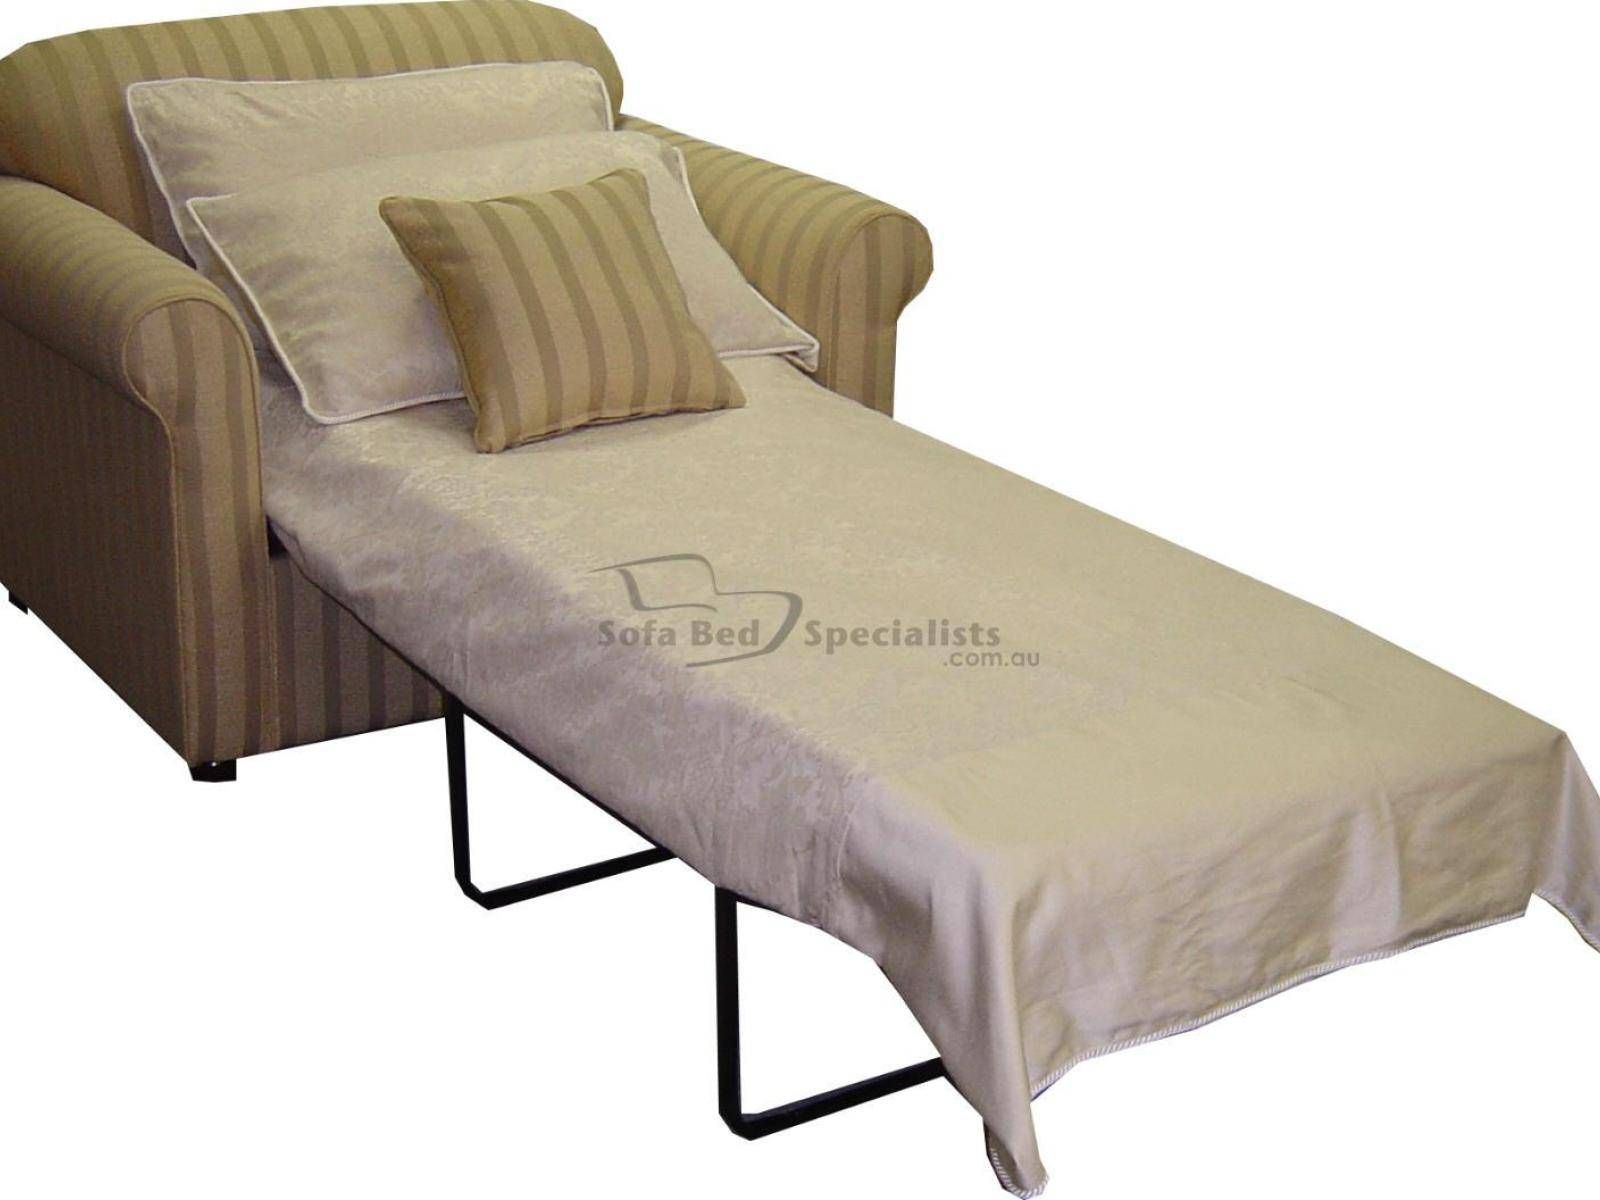 ▻ Sofa : 31 Folding A Futon Bed 2 Foam Sleeper Sofa Bed Mattress Intended For Folding Sofa Chairs (Photo 21 of 30)